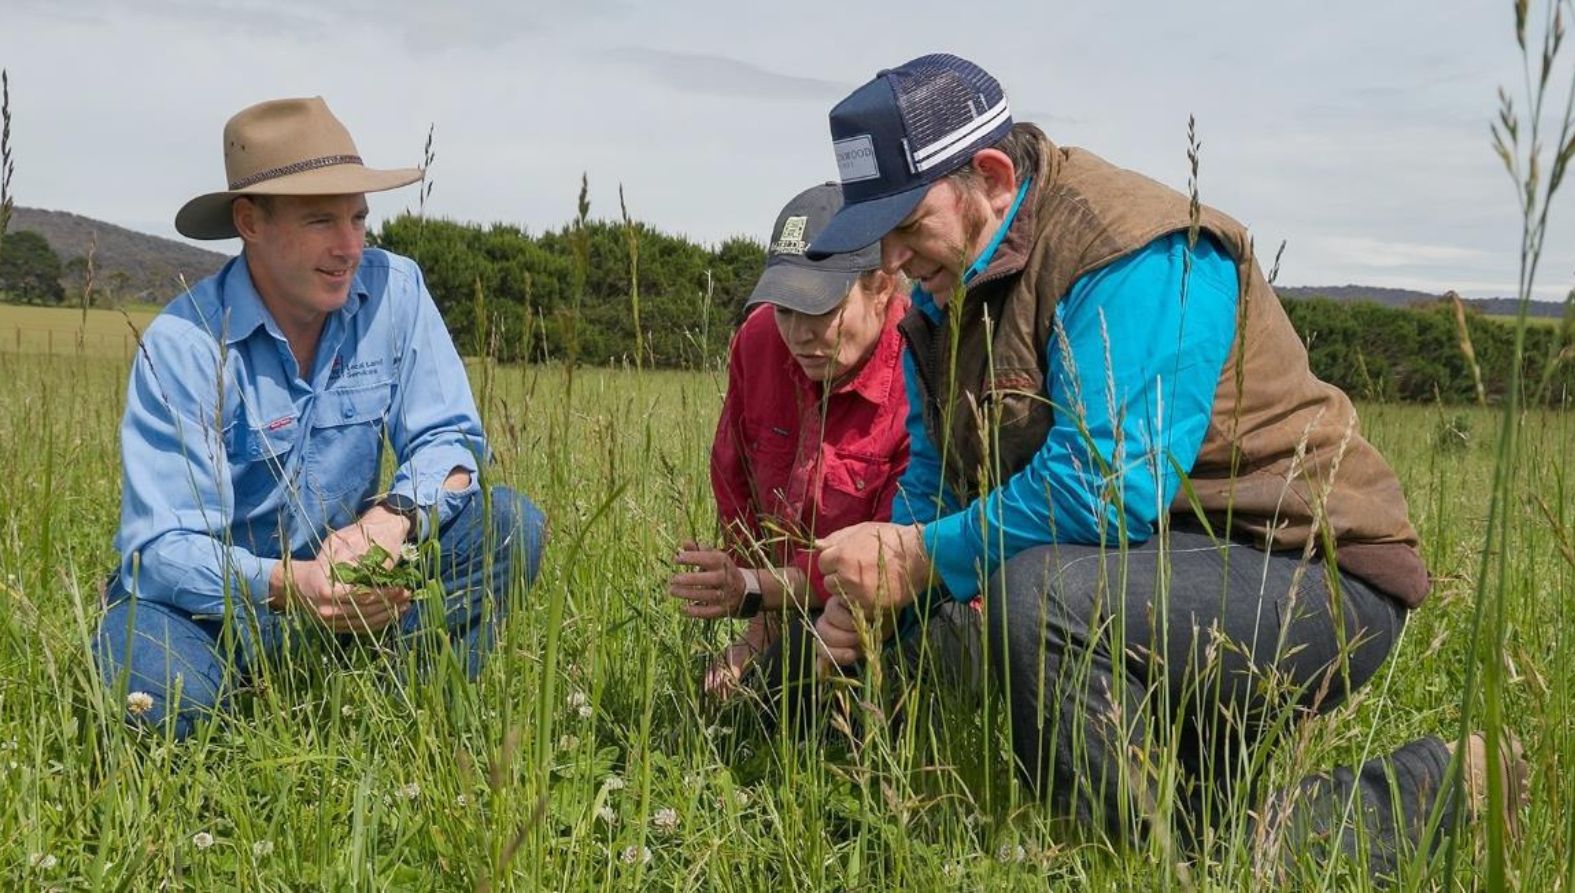 3 farmers crouching in tall grass engaged in conversation